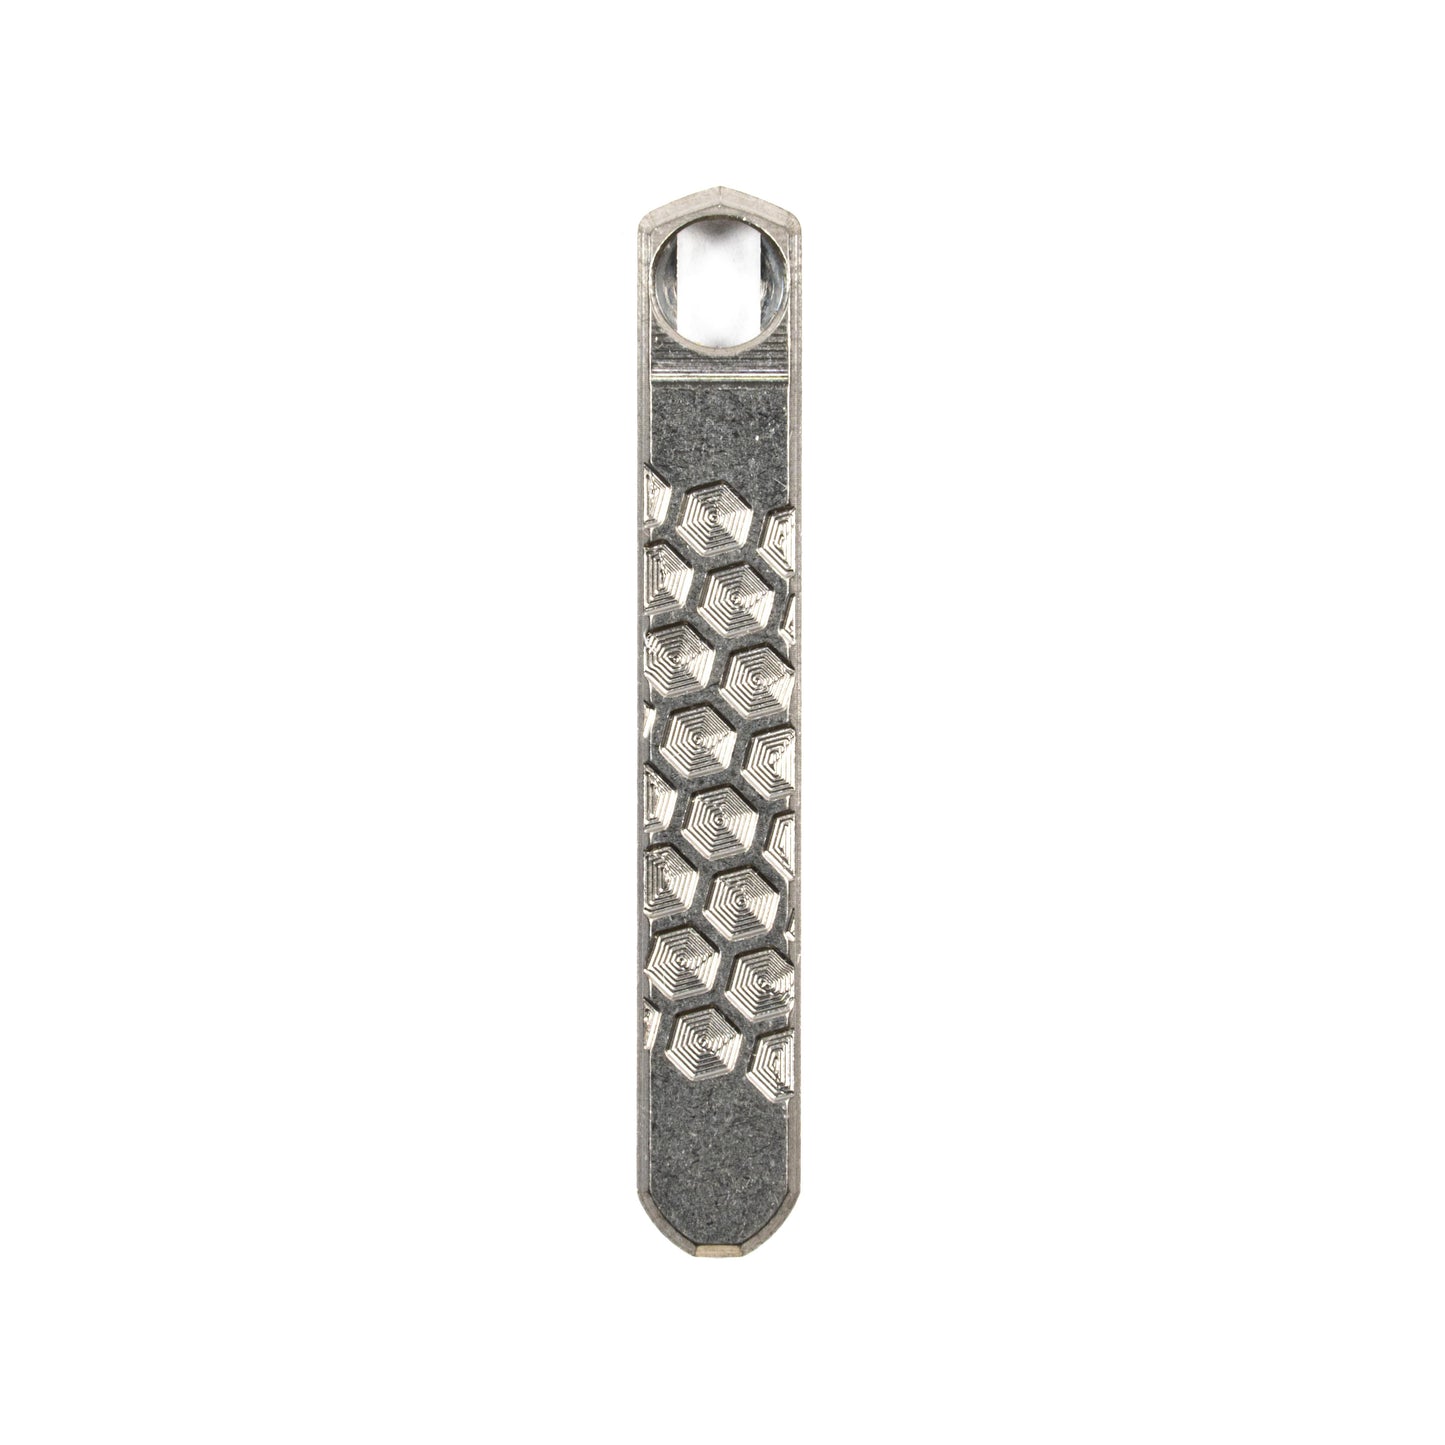 Spyderco Techno/Wire Replacement 3D Machined Titanium FLAT Pocket Clips